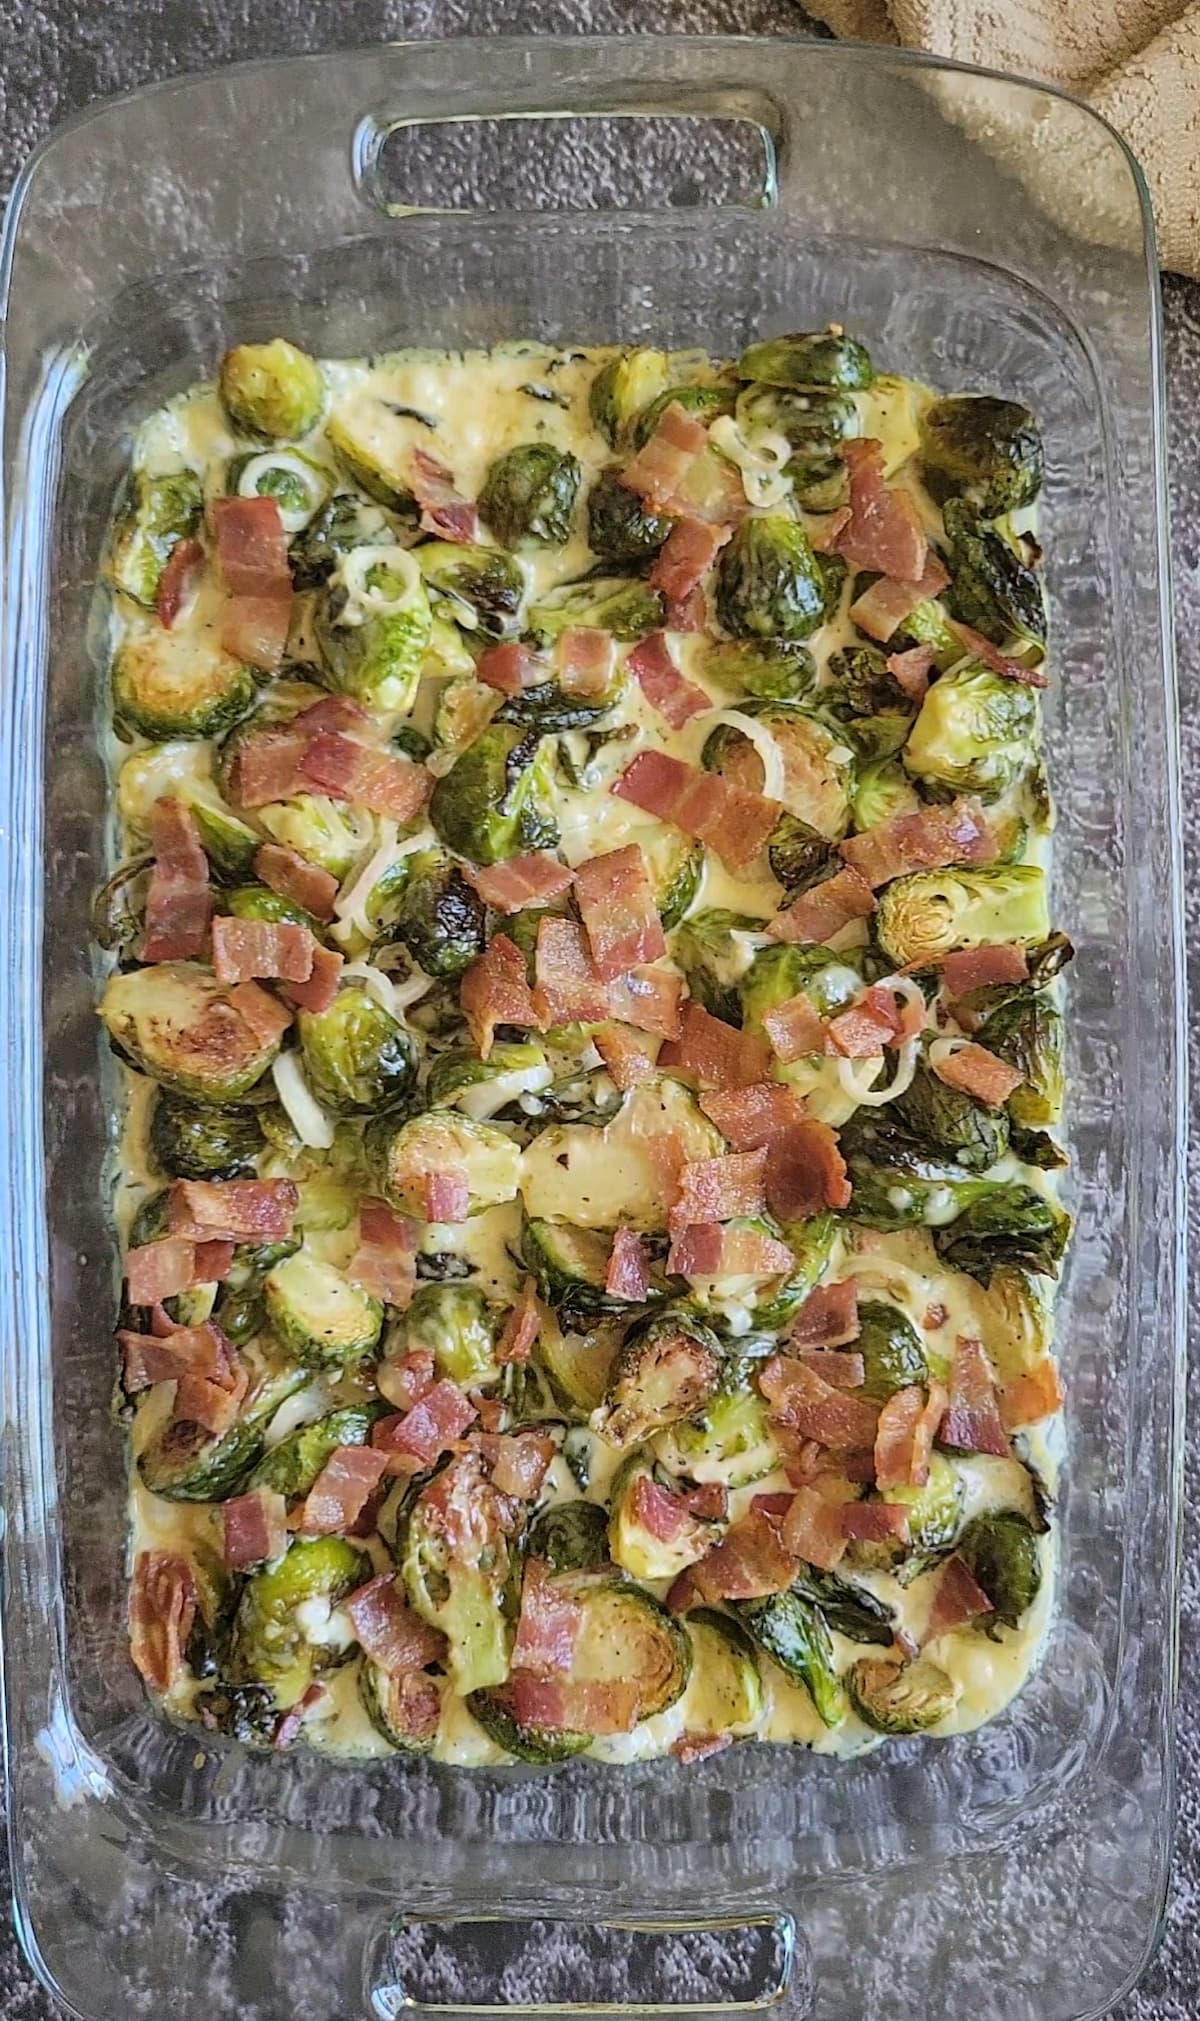 brussels sprouts, bacon and cream sauce in a glass baking dish